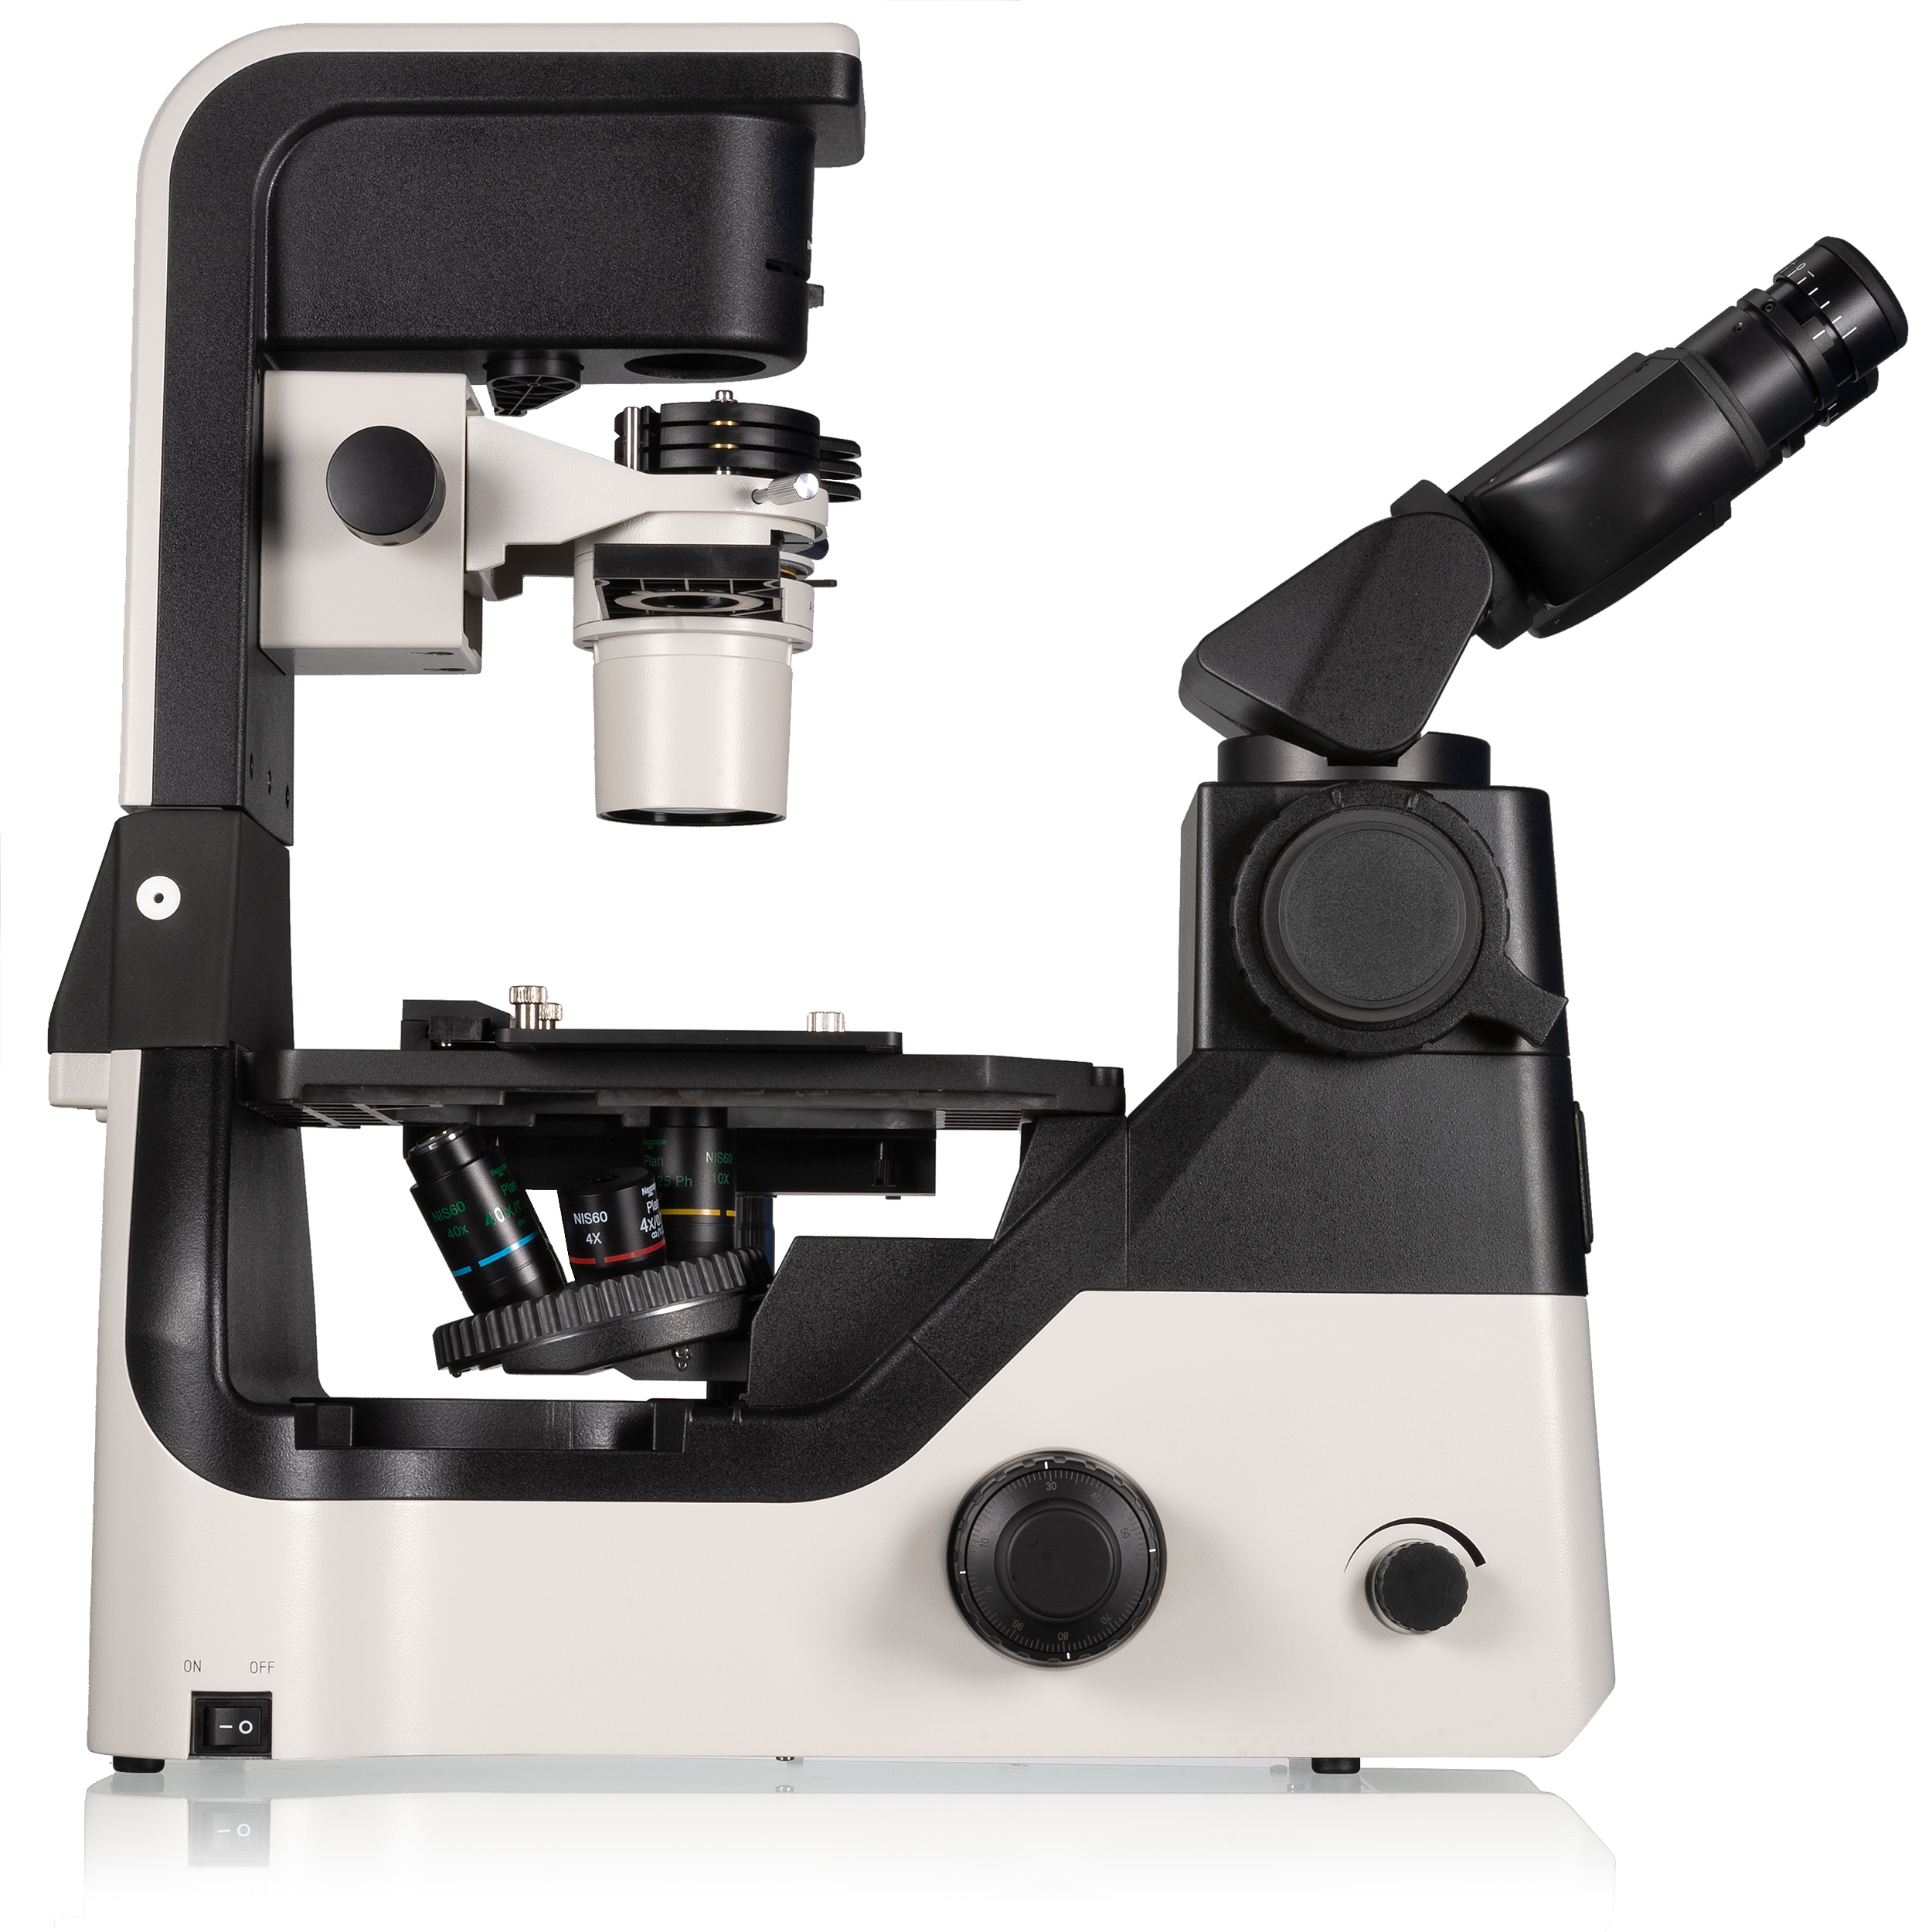 Nexcope NIB630 inverted research microscope with tiltable lighting unit